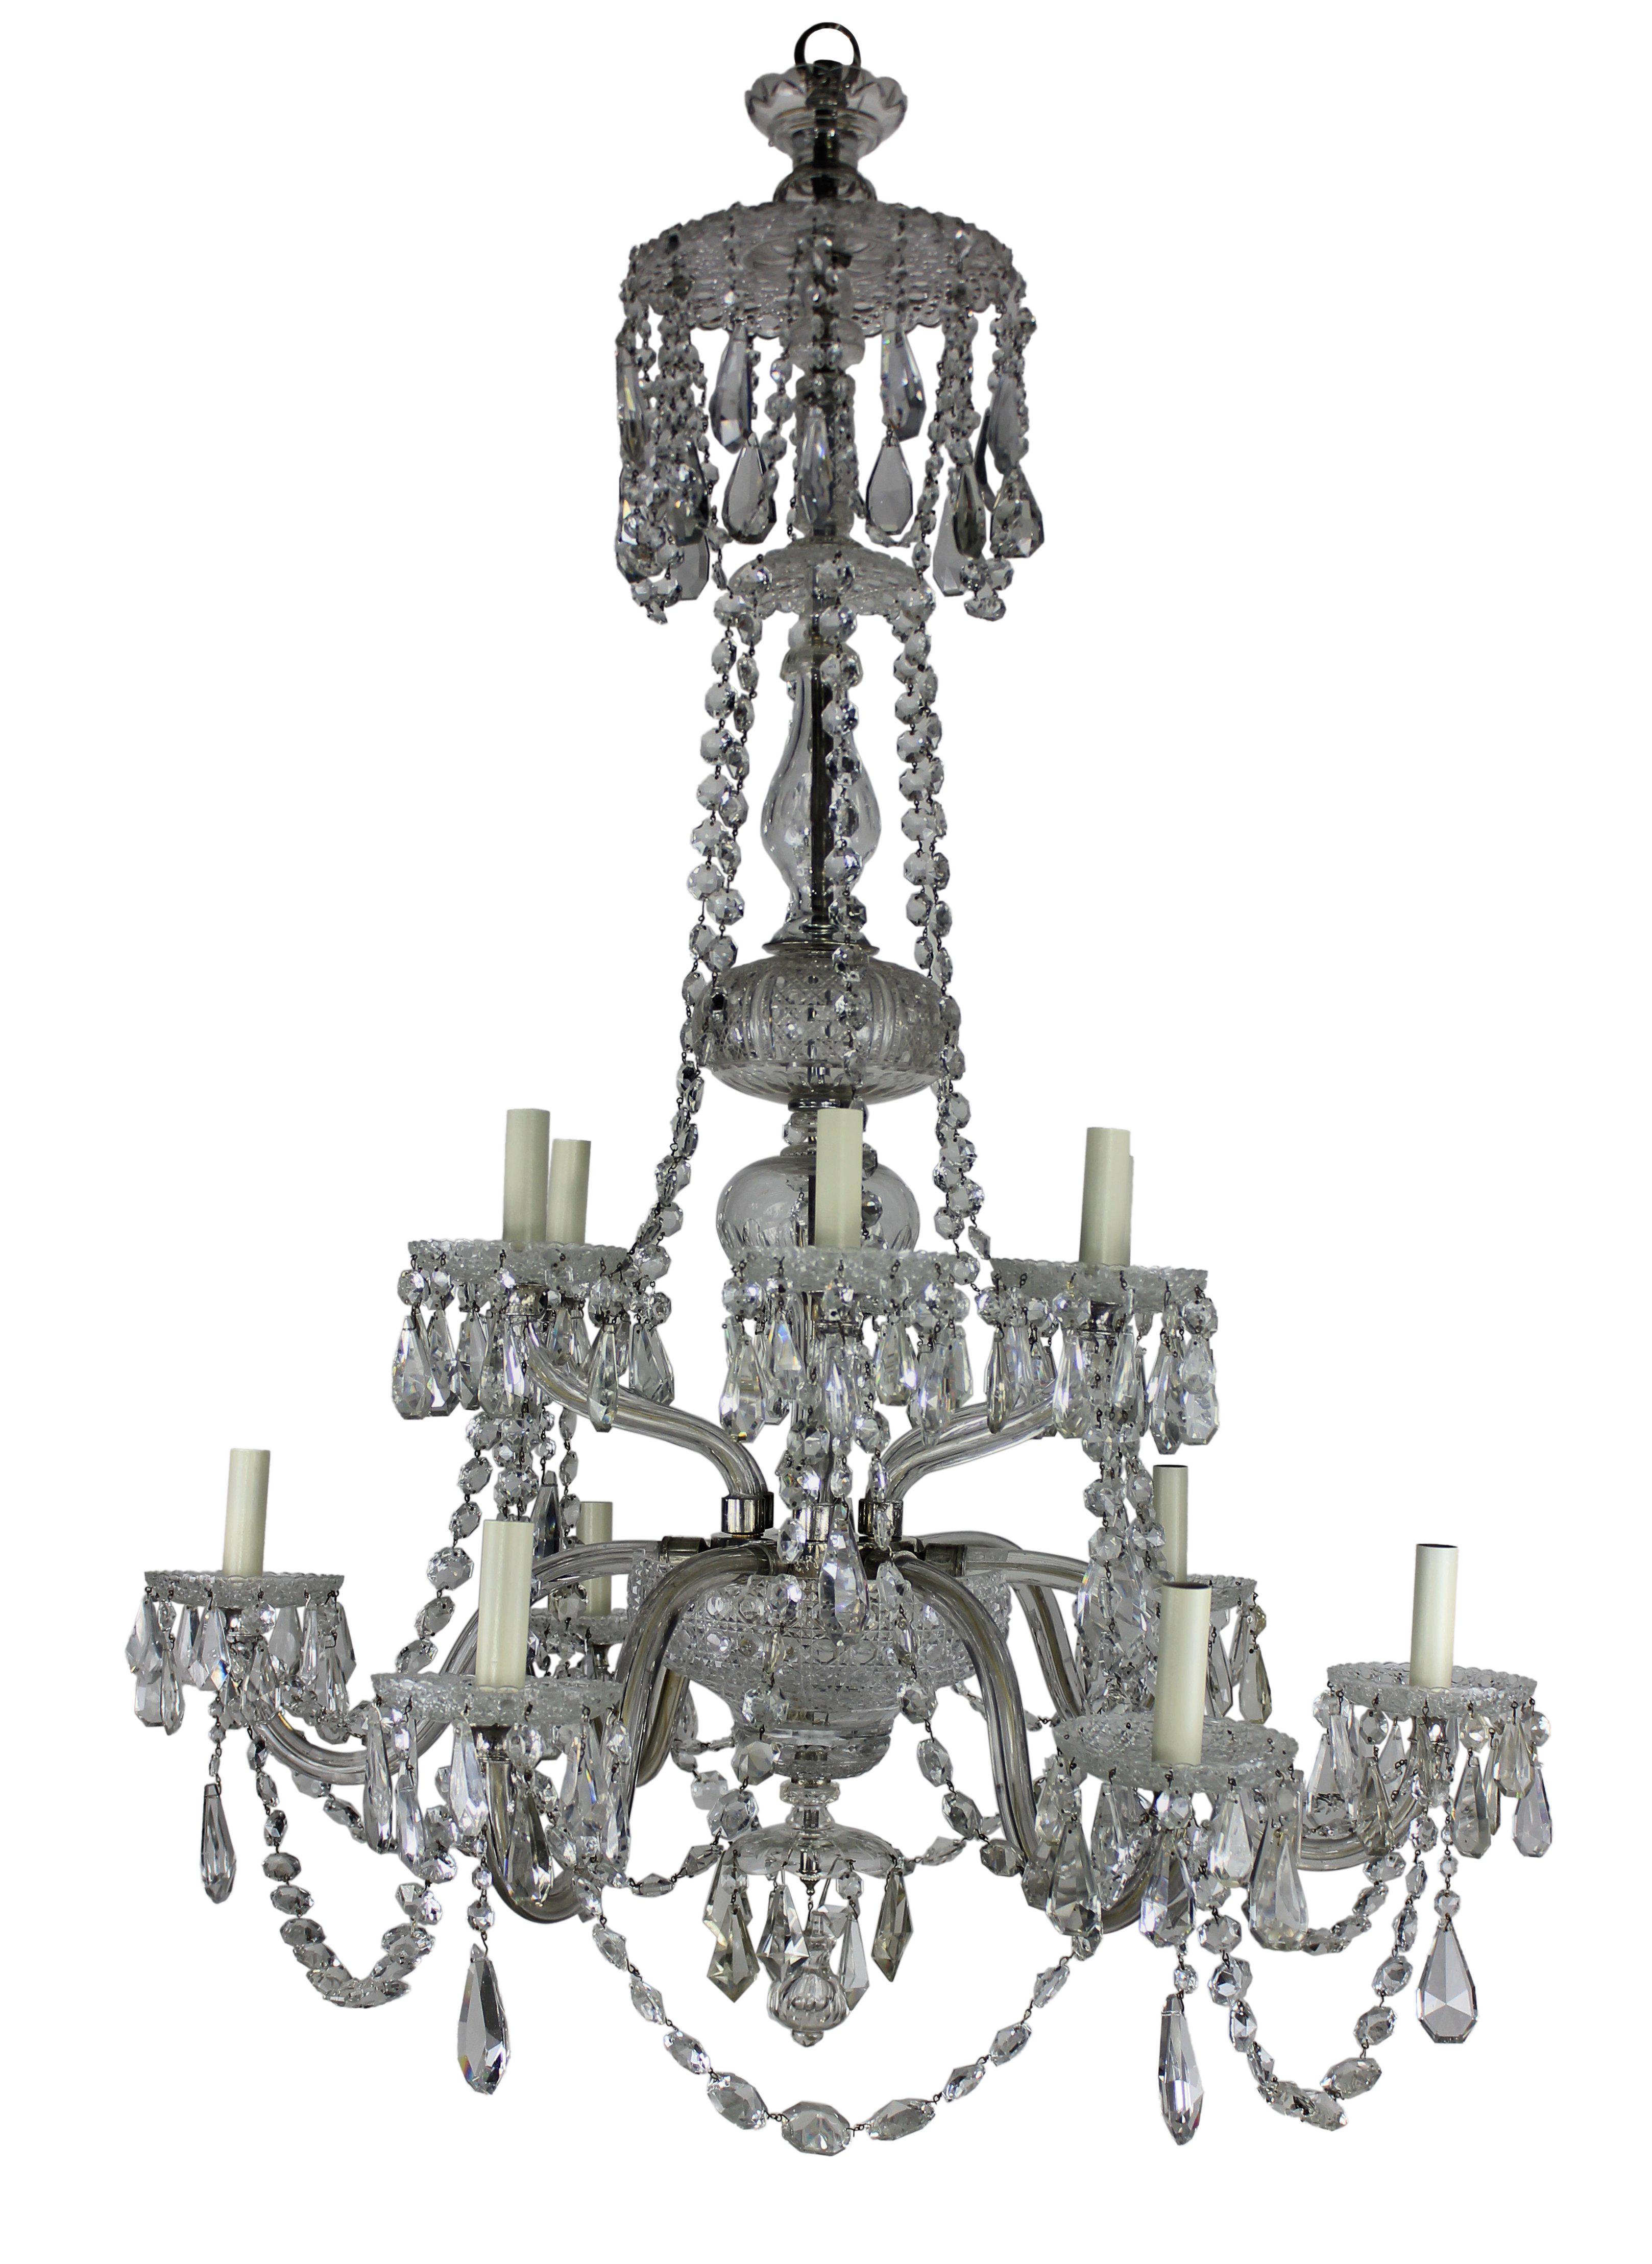 Large 19th Century English Cut-Glass Chandelier 1